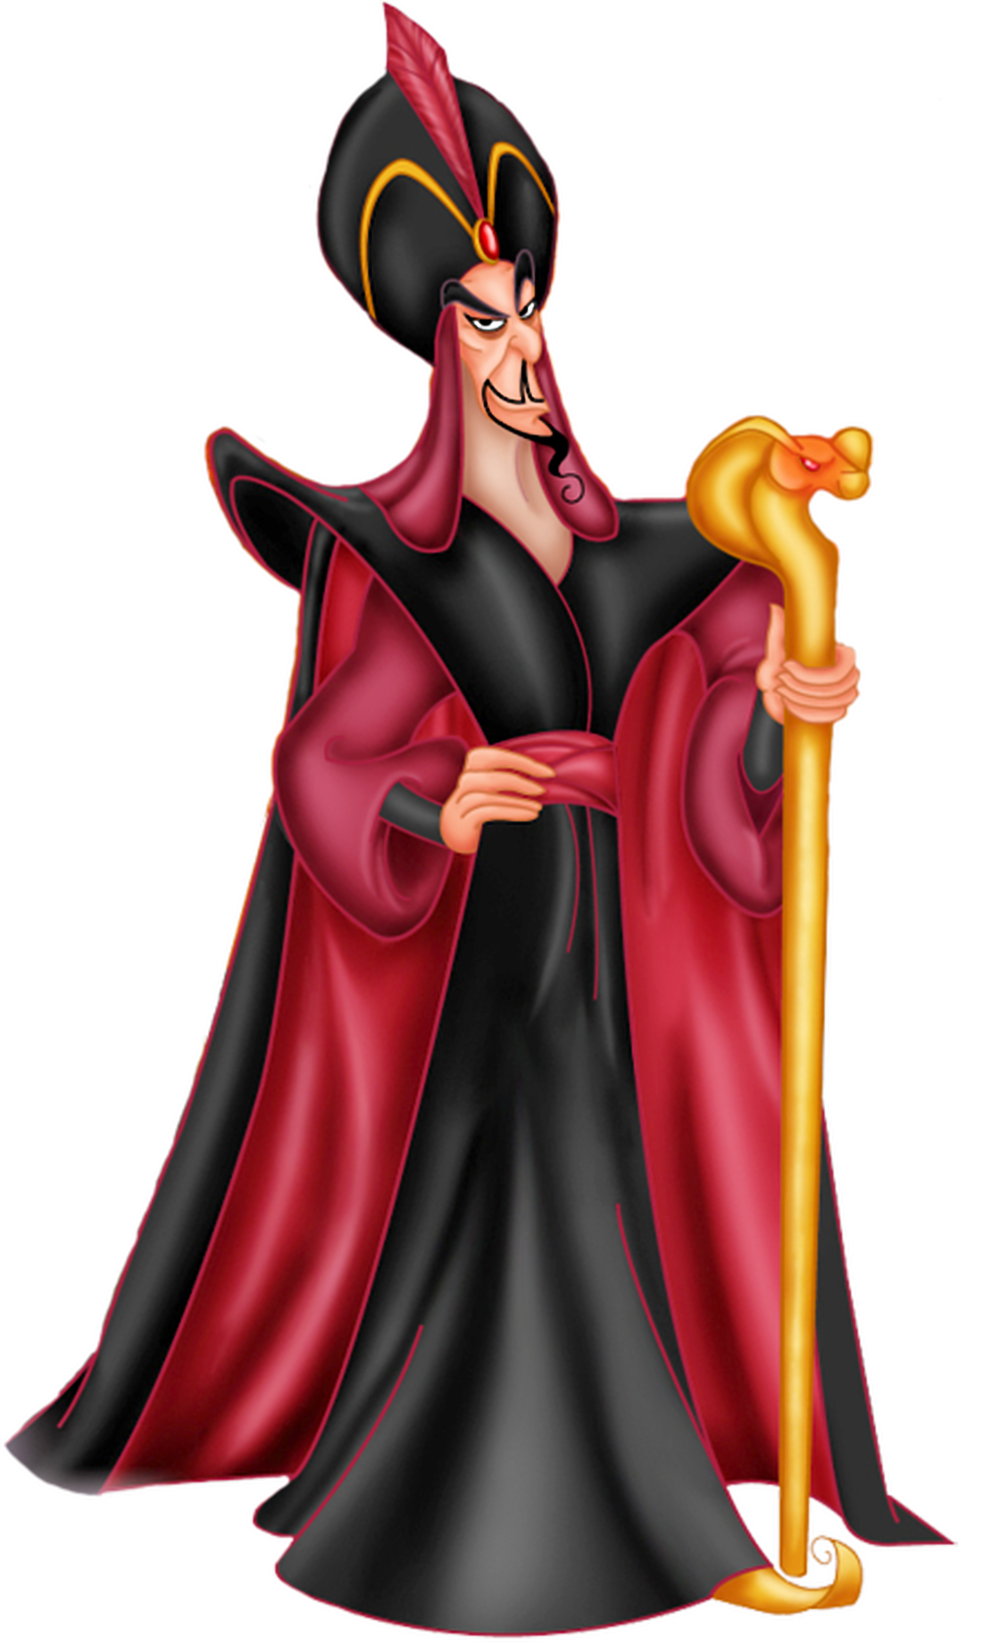 http://img2.wikia.nocookie.net/__cb20150406164412/villains/images/5/56/Jafar.png